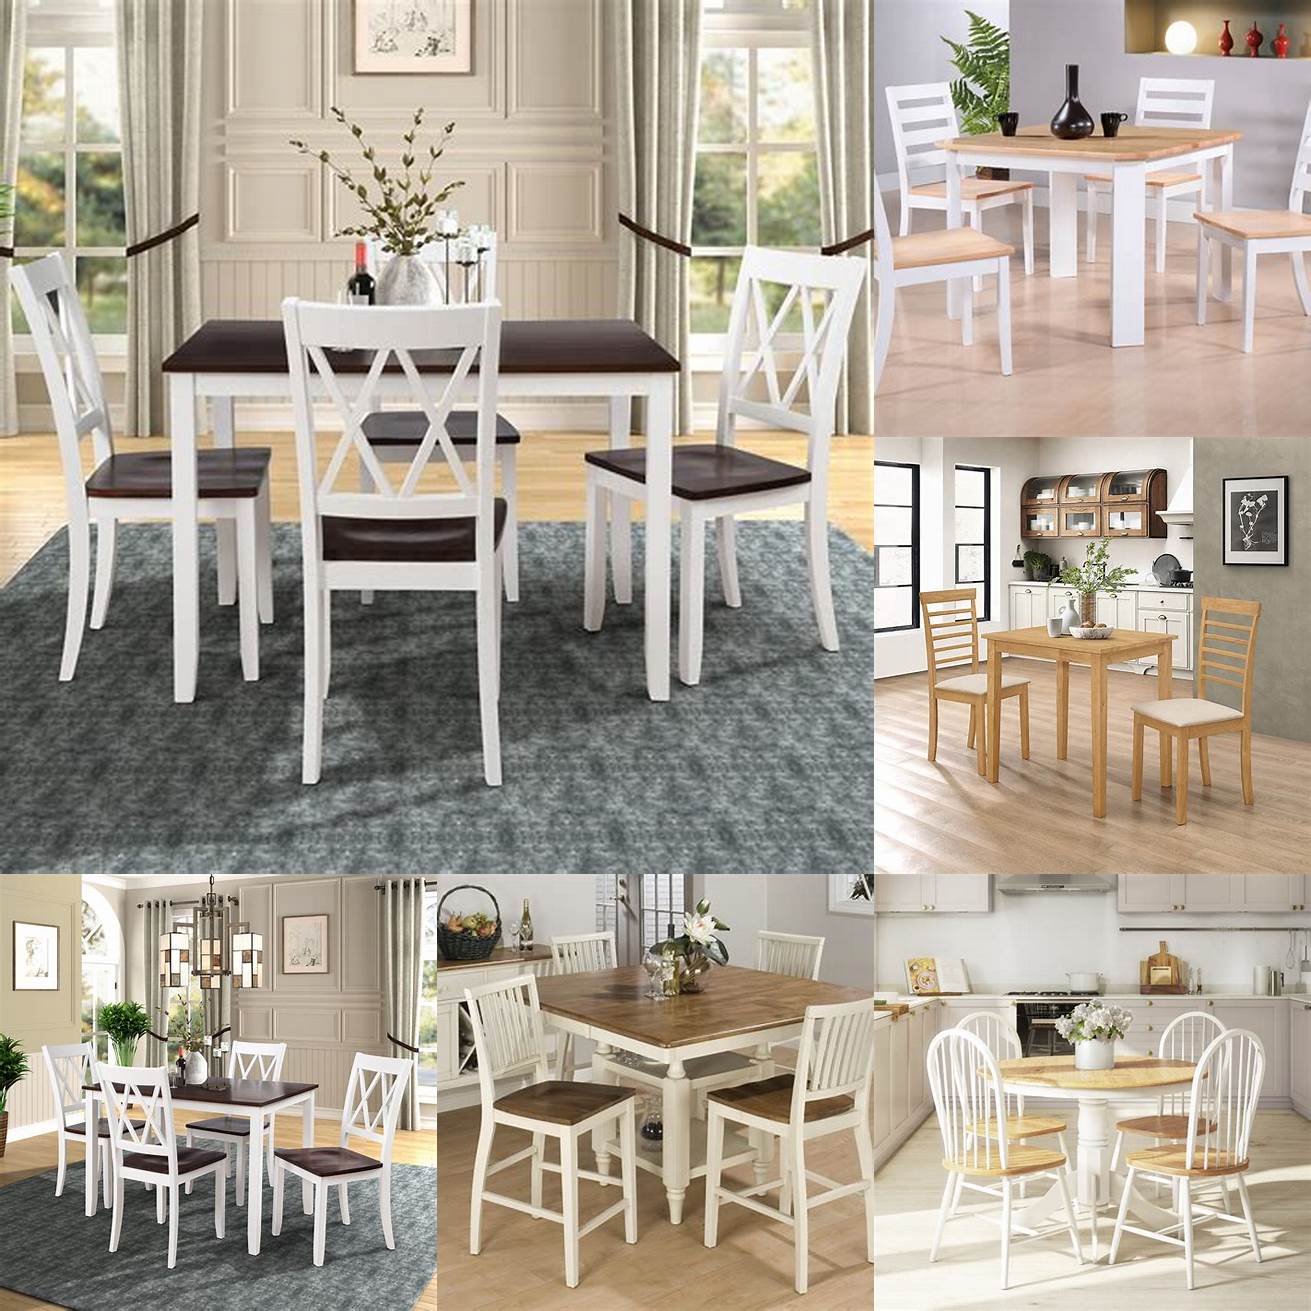 White kitchen table and chairs with wooden floor